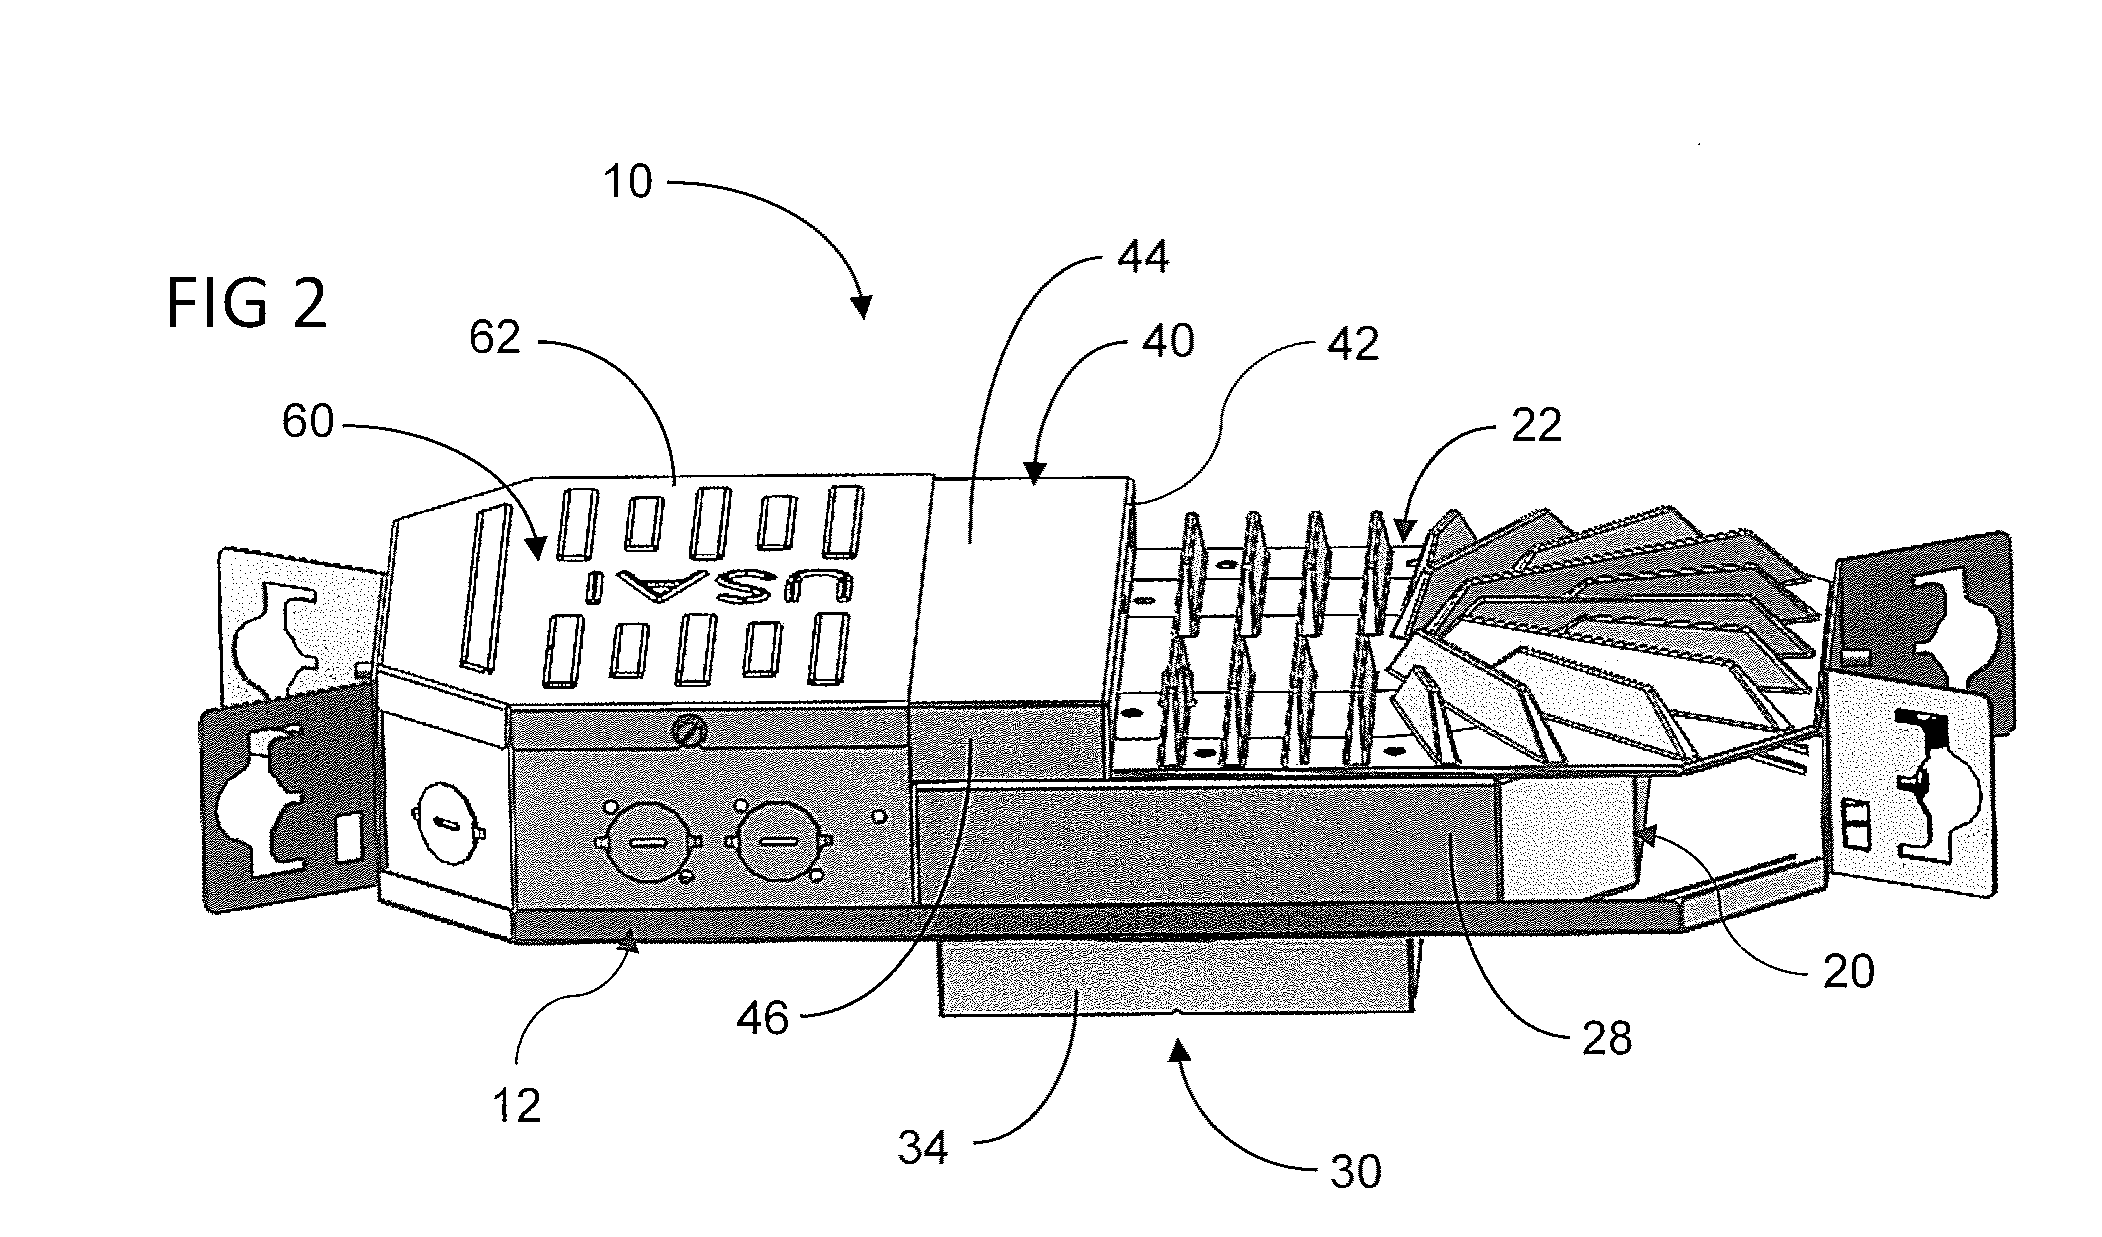 Low Profile Lighting Fixture With Movable Heat Sink And Lighting Element Assembly